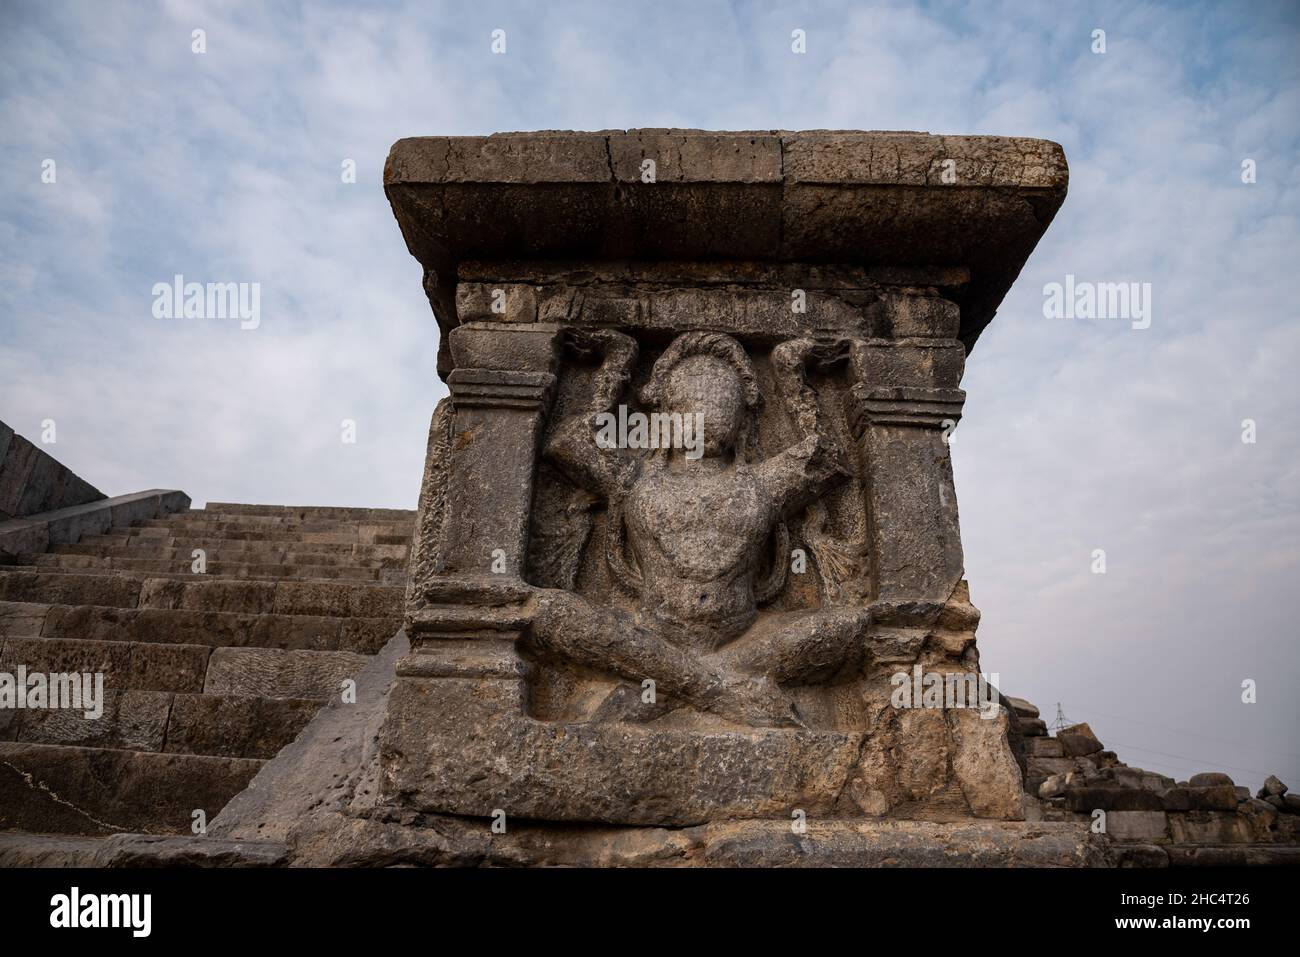 A view of carvings at the stairs of remains of Parihaspora Temple.Parihaspora is a small town 22 kilometers northwest of Srinagar, Kashmir . It was built on a plateau above the Jhelum River. It was built by Lalitaditya Muktapida (695-731) and served as the capital of Kashmir during his reign. Kalhana mentions the construction of the city in his Book 4 cantos 194-204. Lalitaditya according to Kalhana built his residence and four temples in this area. The temples included one for Vishnu where according to Kalhana the emperor used 84,000 tolas of gold to make the image of Vishnu. In another temp Stock Photo